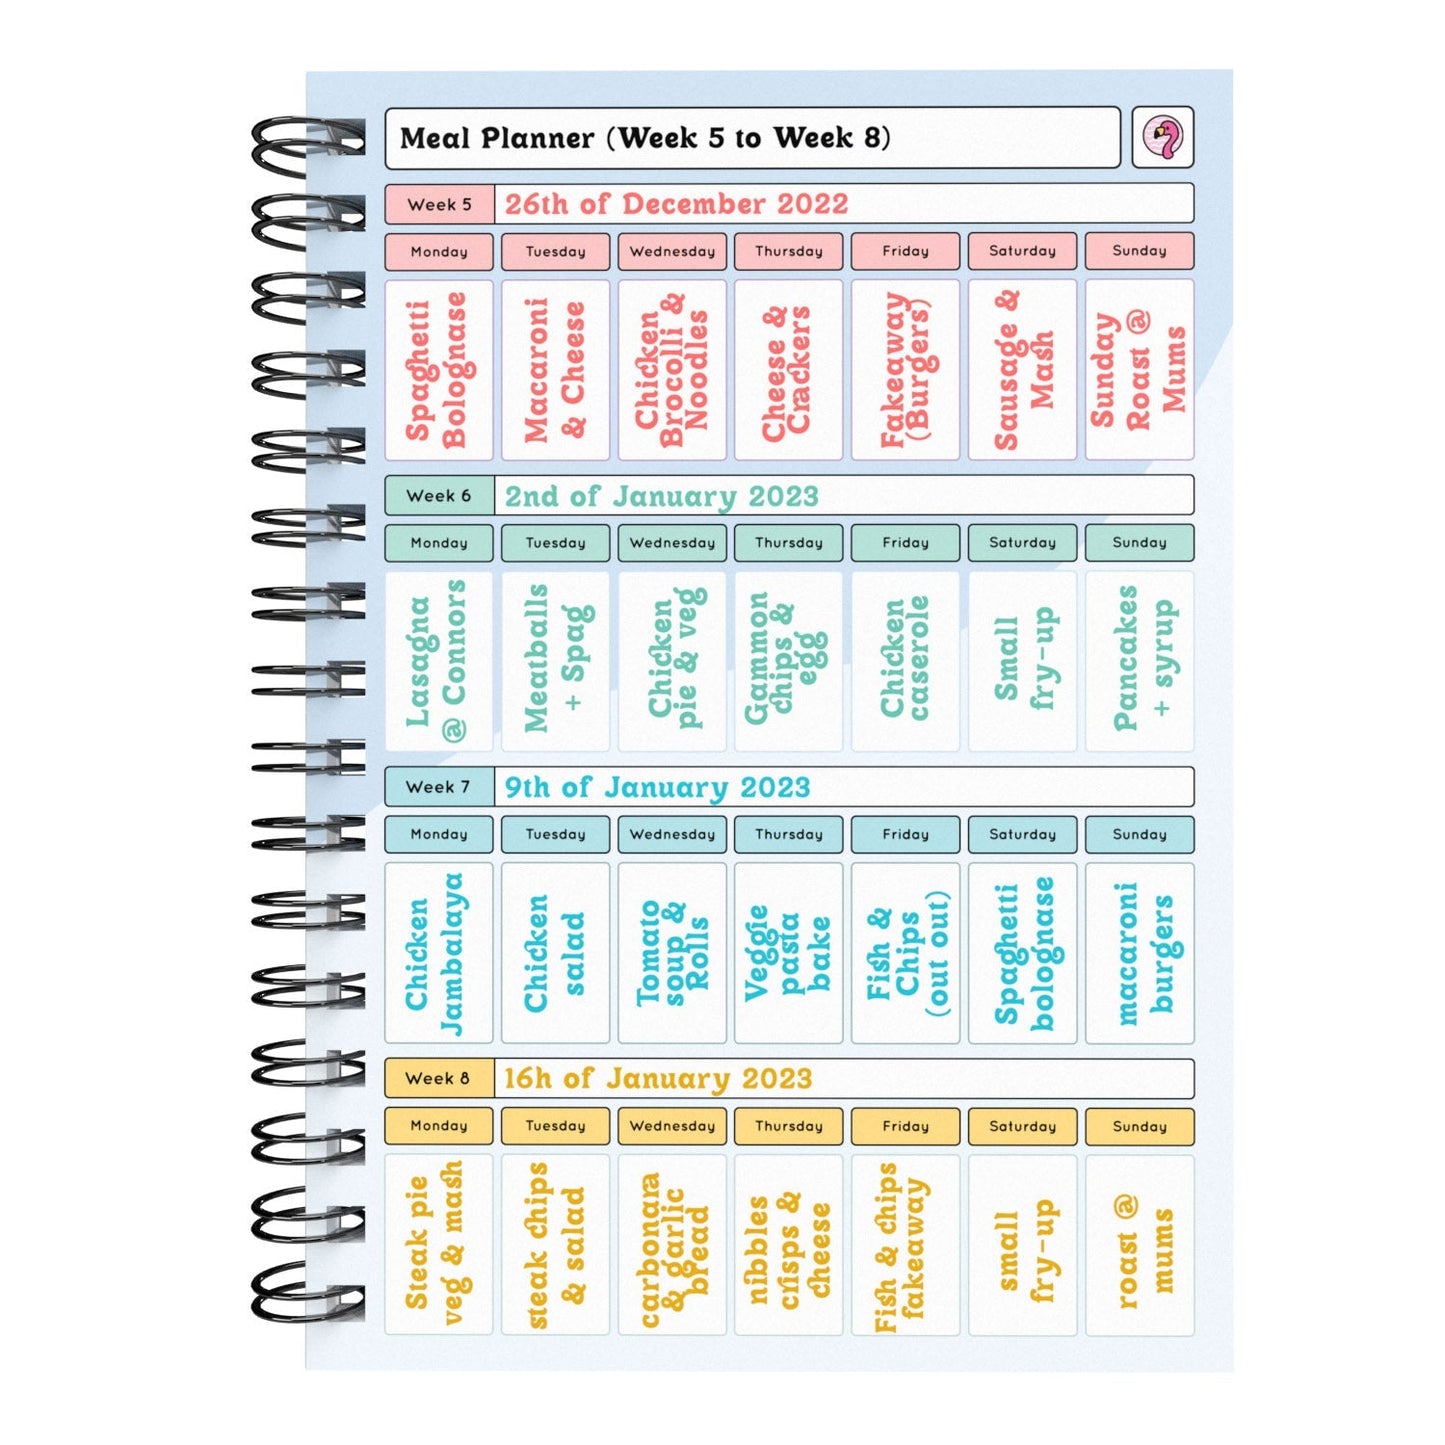 Food Diary - C79 - Calorie Counting